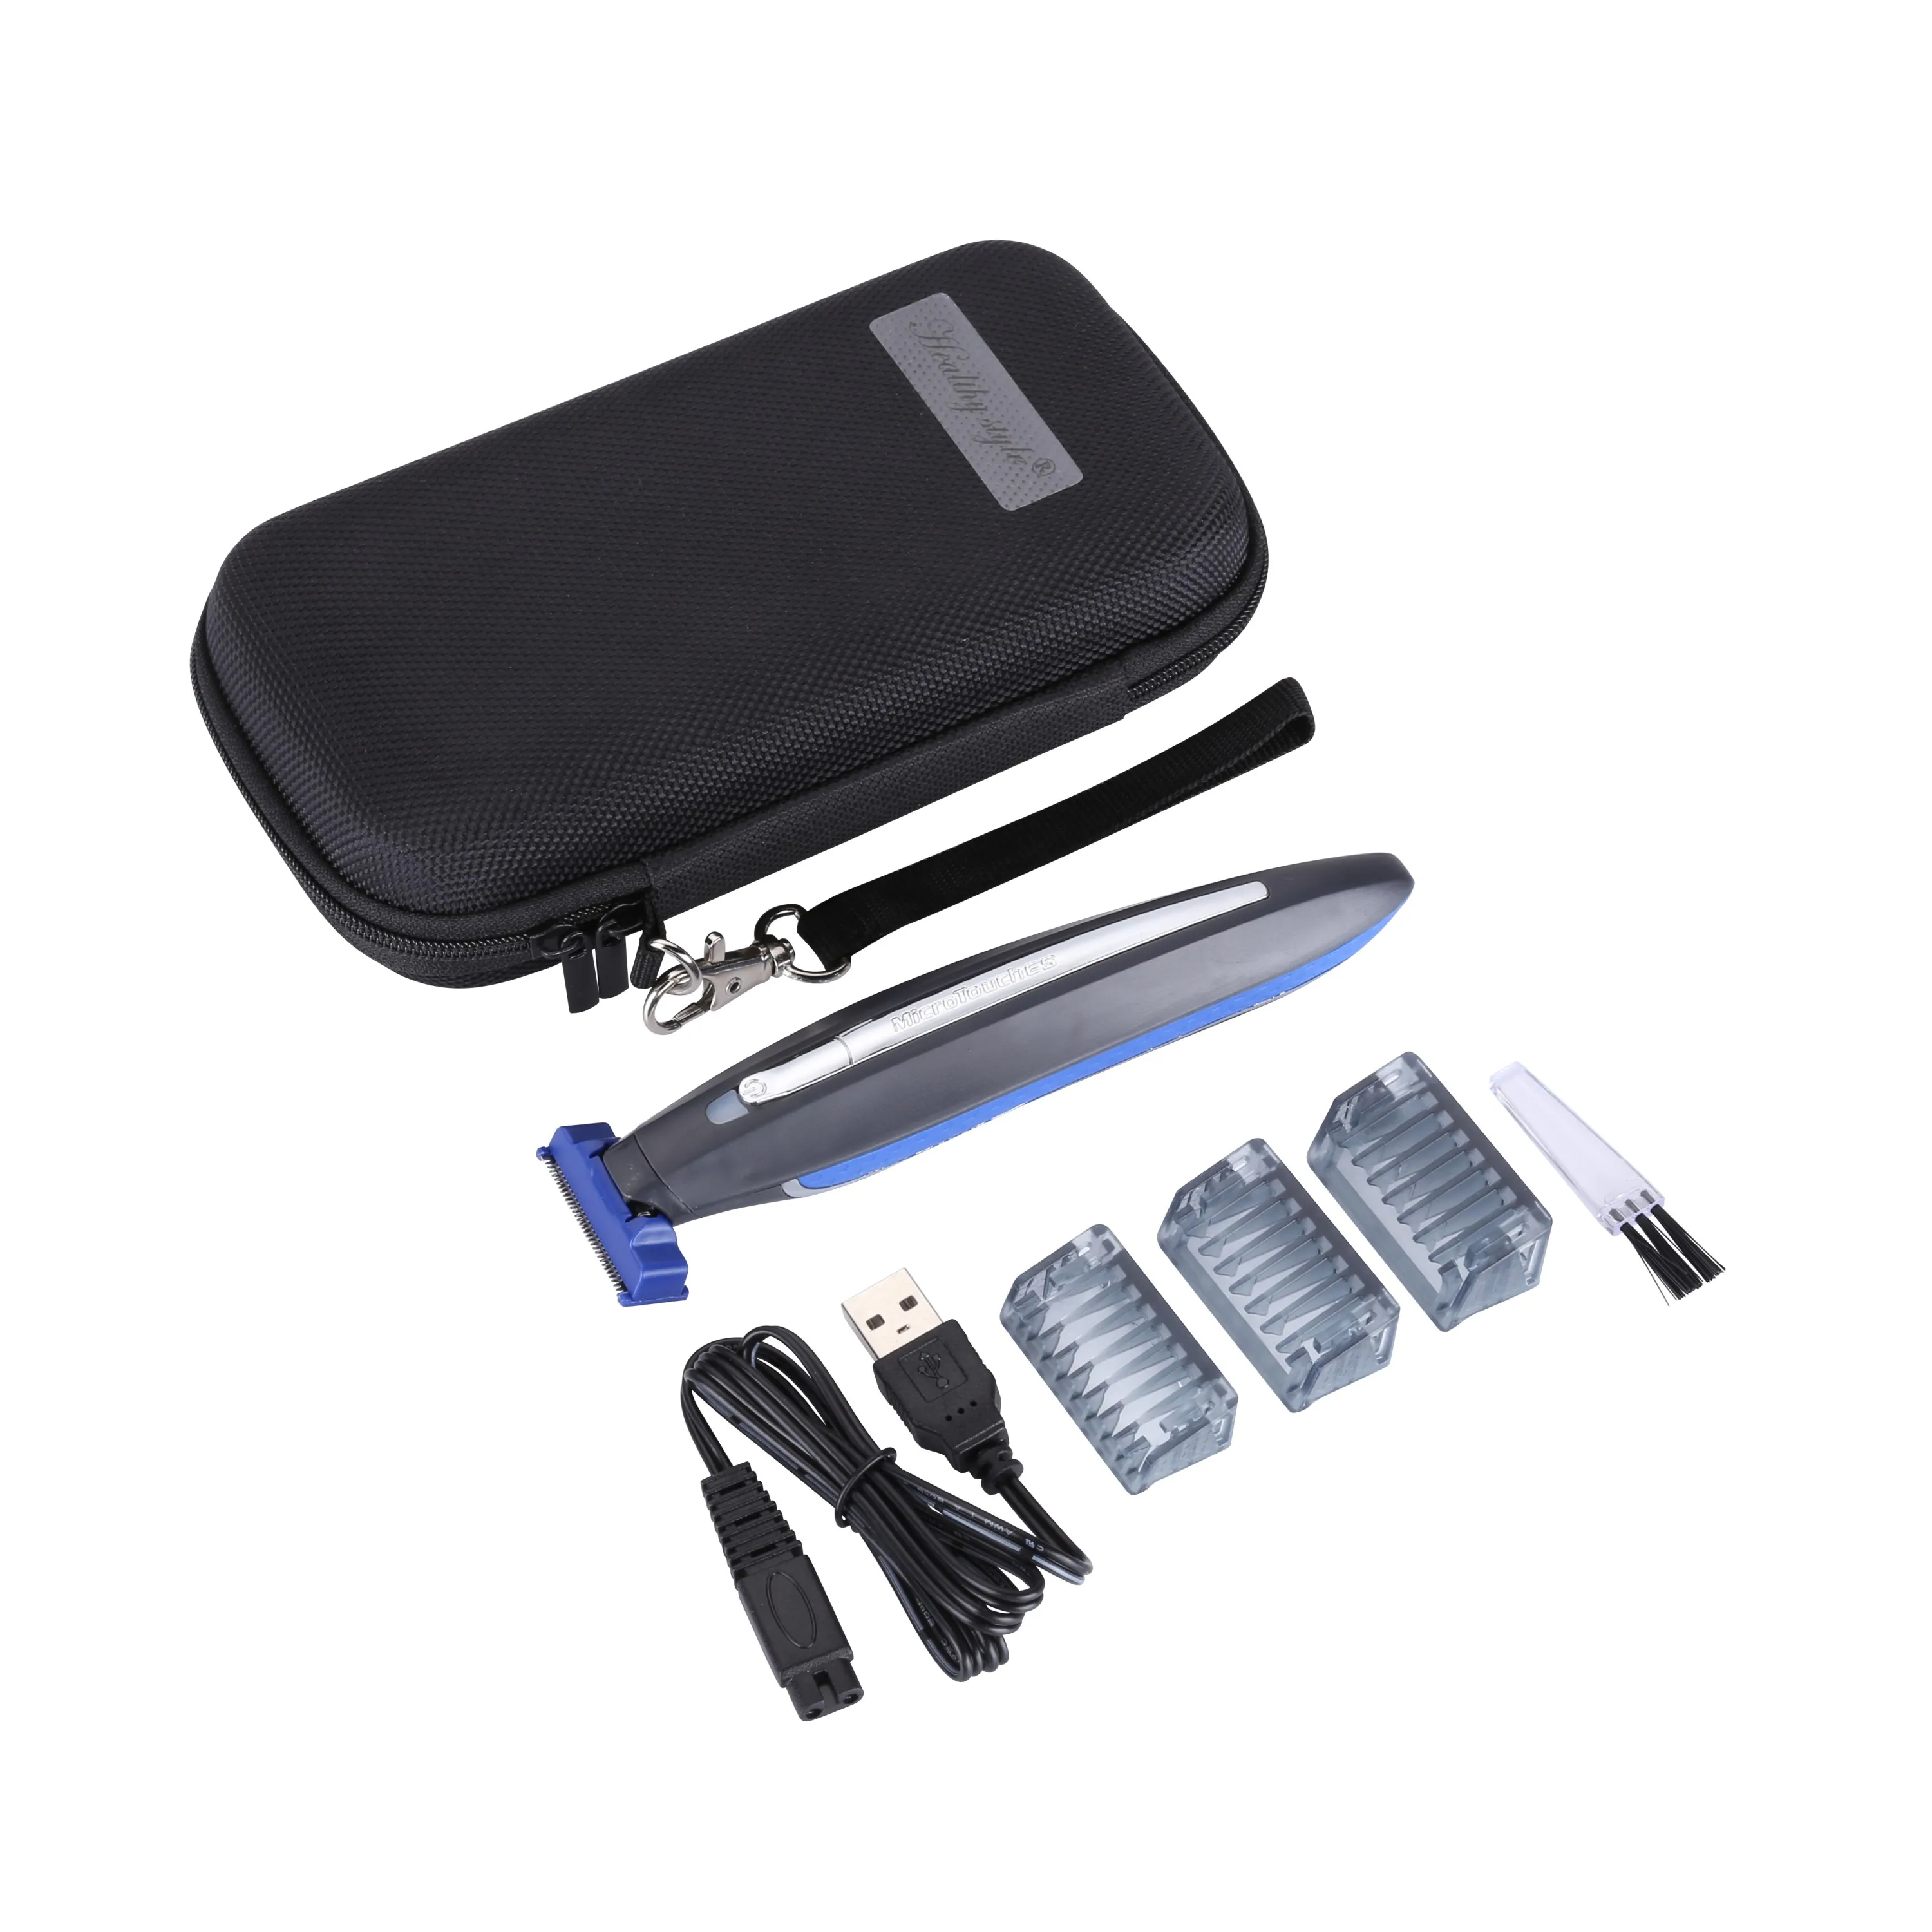 Case Hard Storage Travel Carrying Case for Micro Beard Razor Full Body Trimmer and Shaver